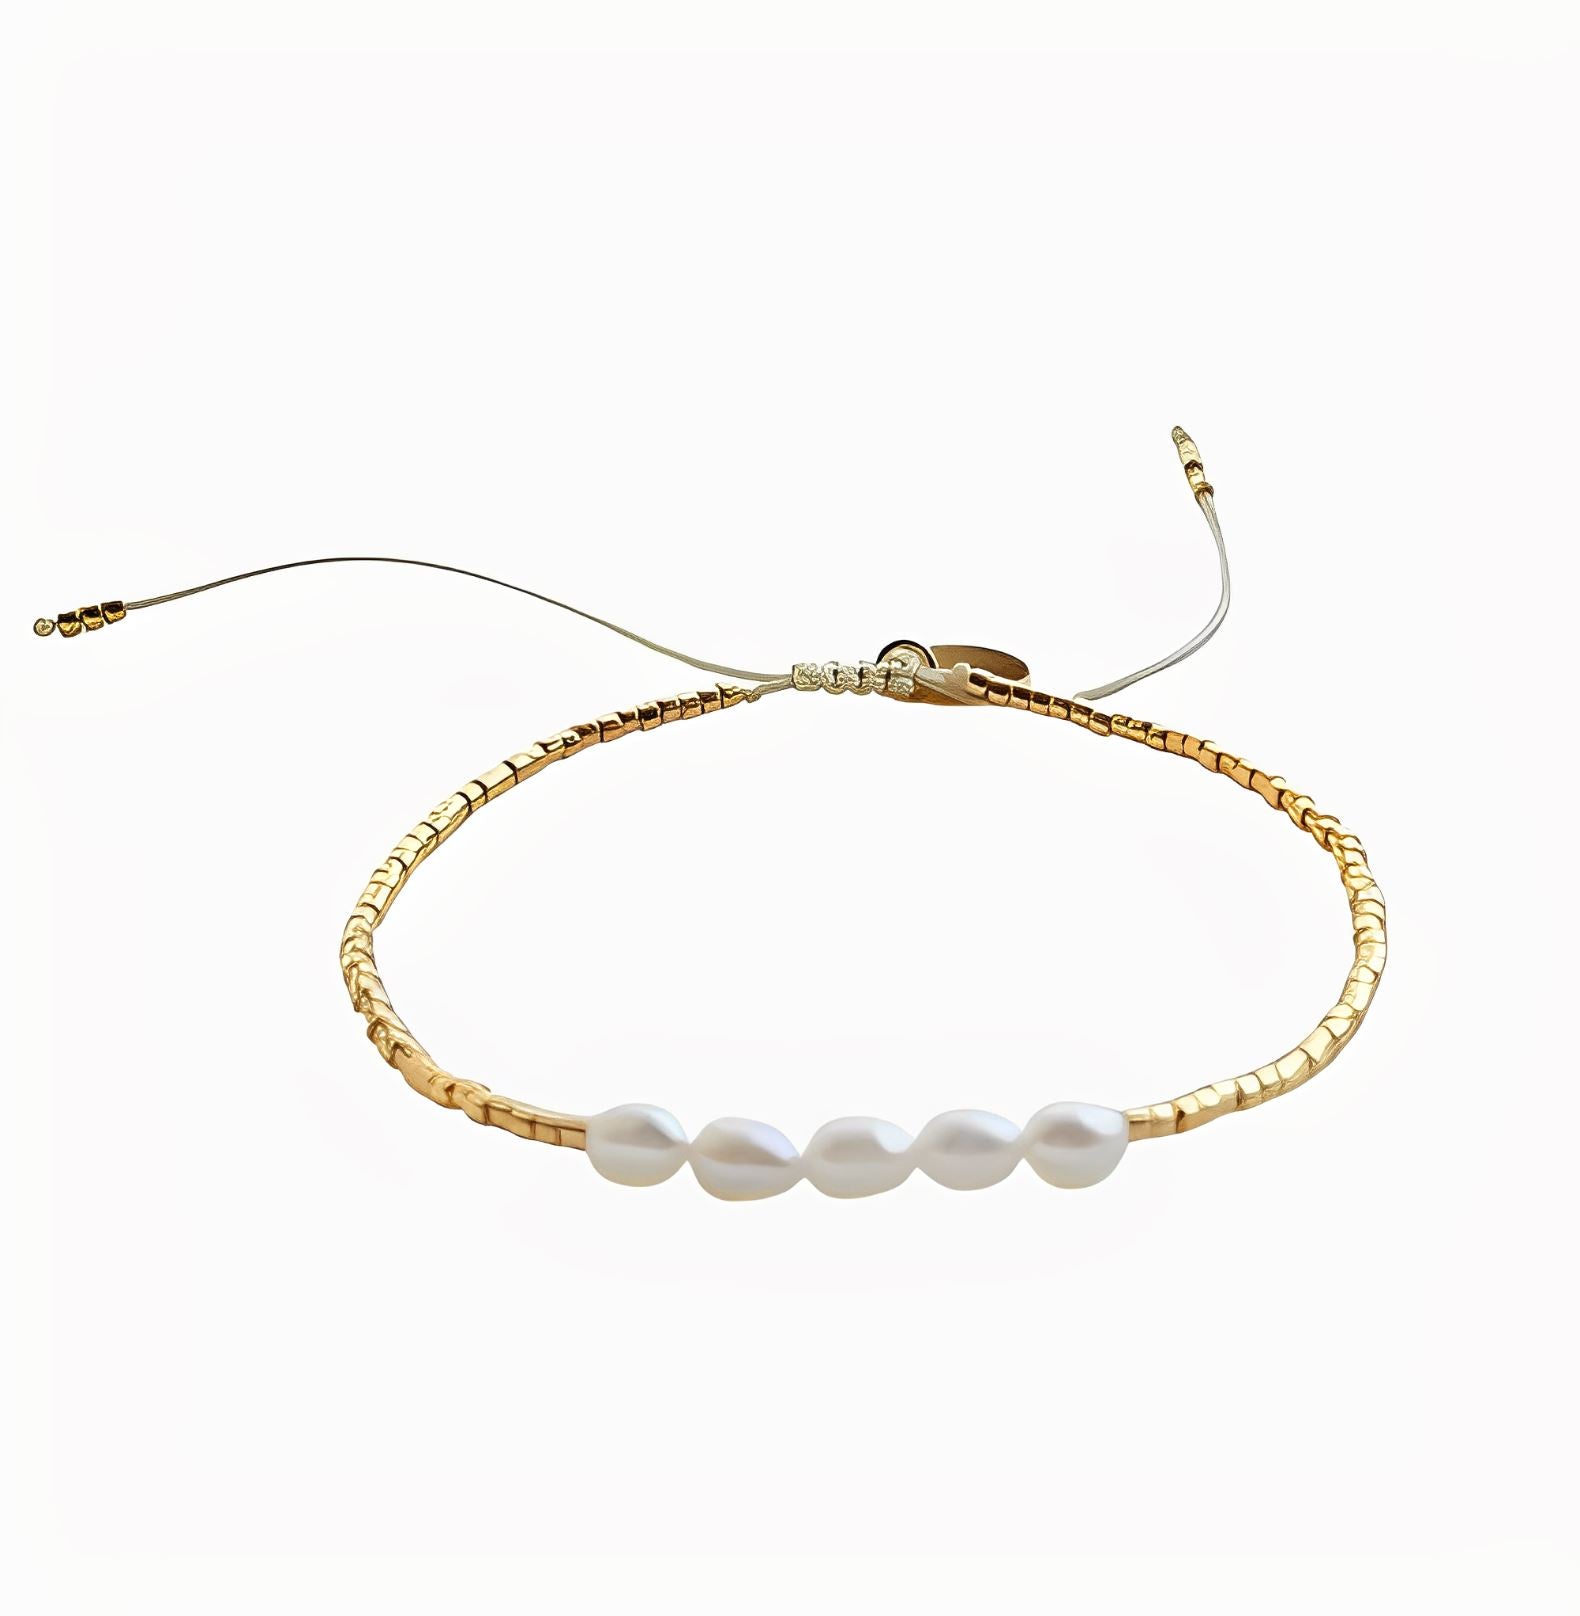 LOVINA FRESH-WATER PEARL BRACELET braclet Yubama Jewelry Online Store - The Elegant Designs of Gold and Silver ! 